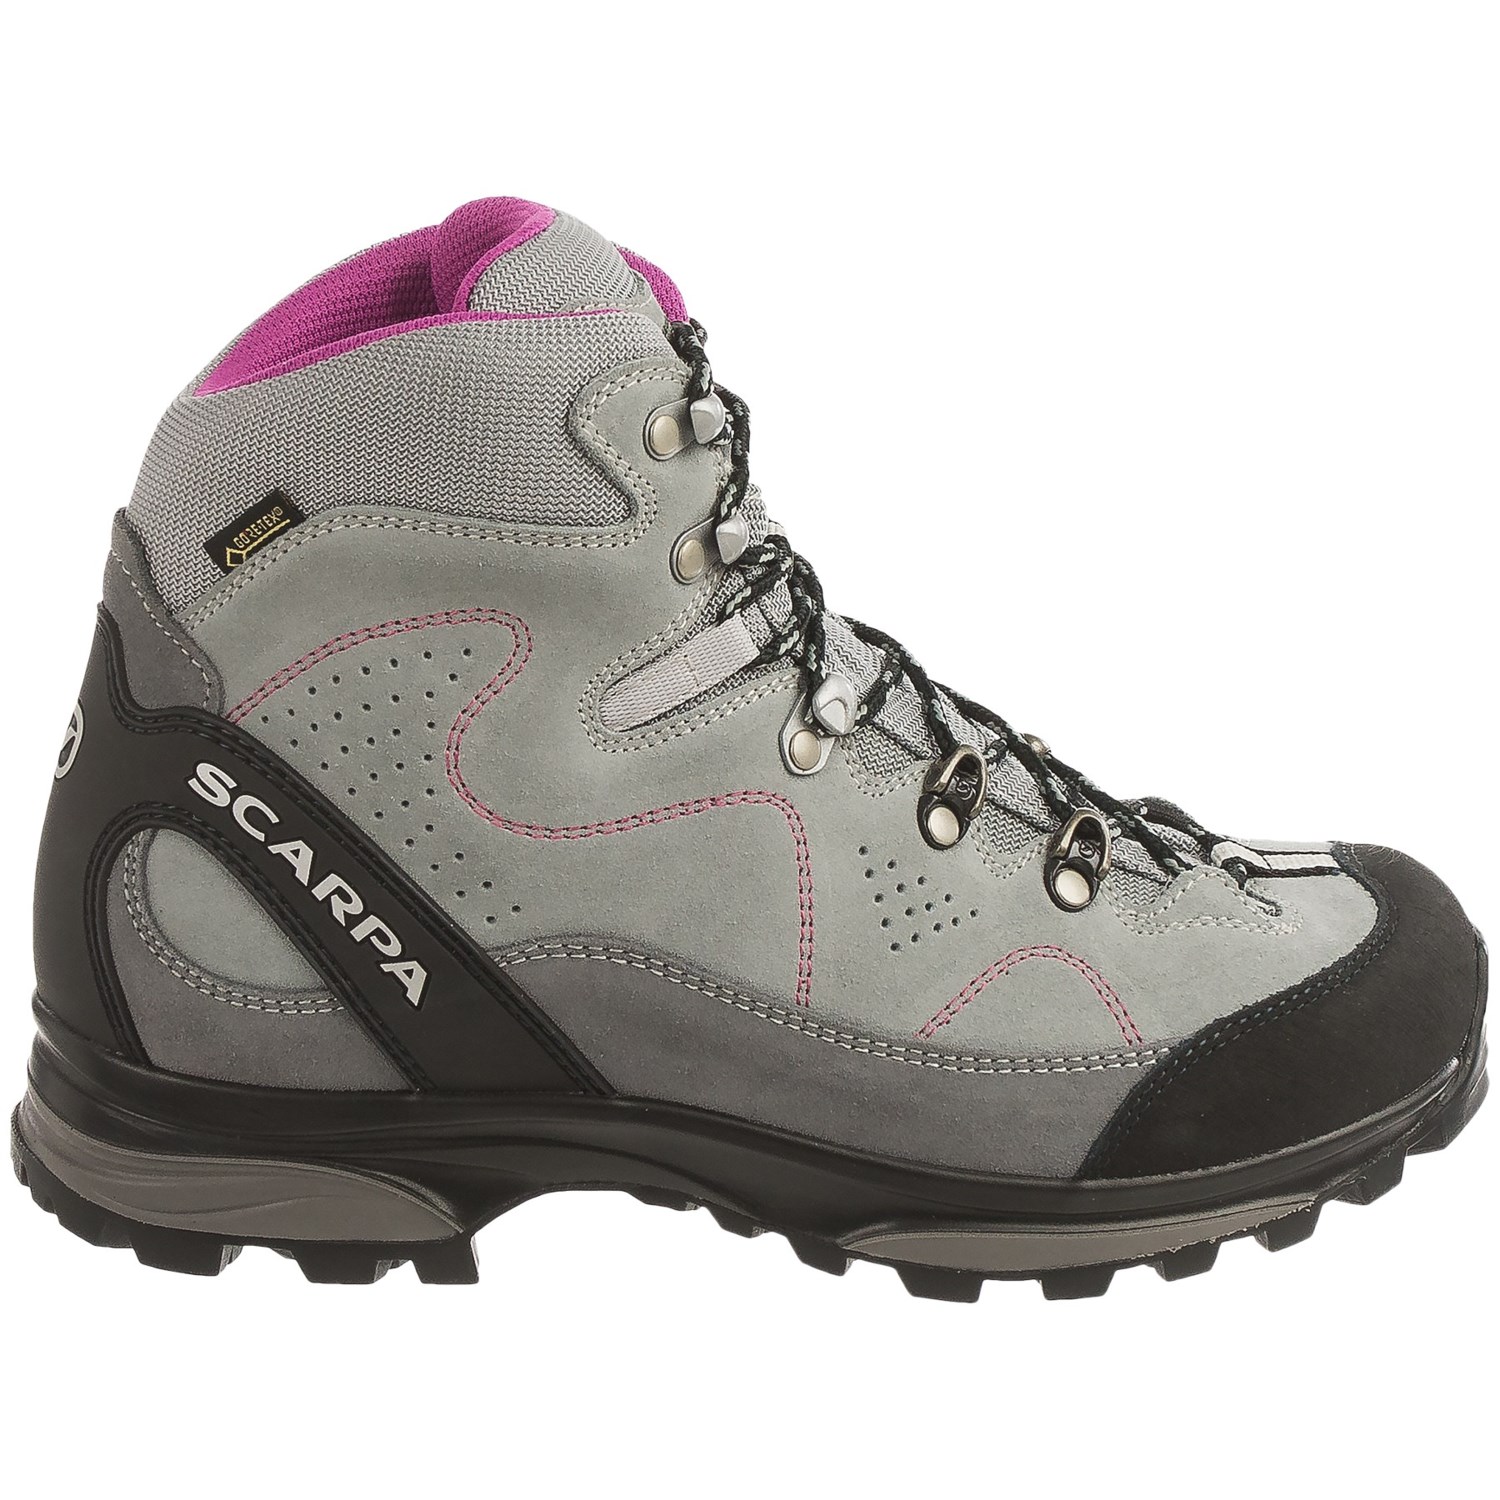 Scarpa Mythos Gore-Tex® Hiking Boots (For Women) - Save 39%